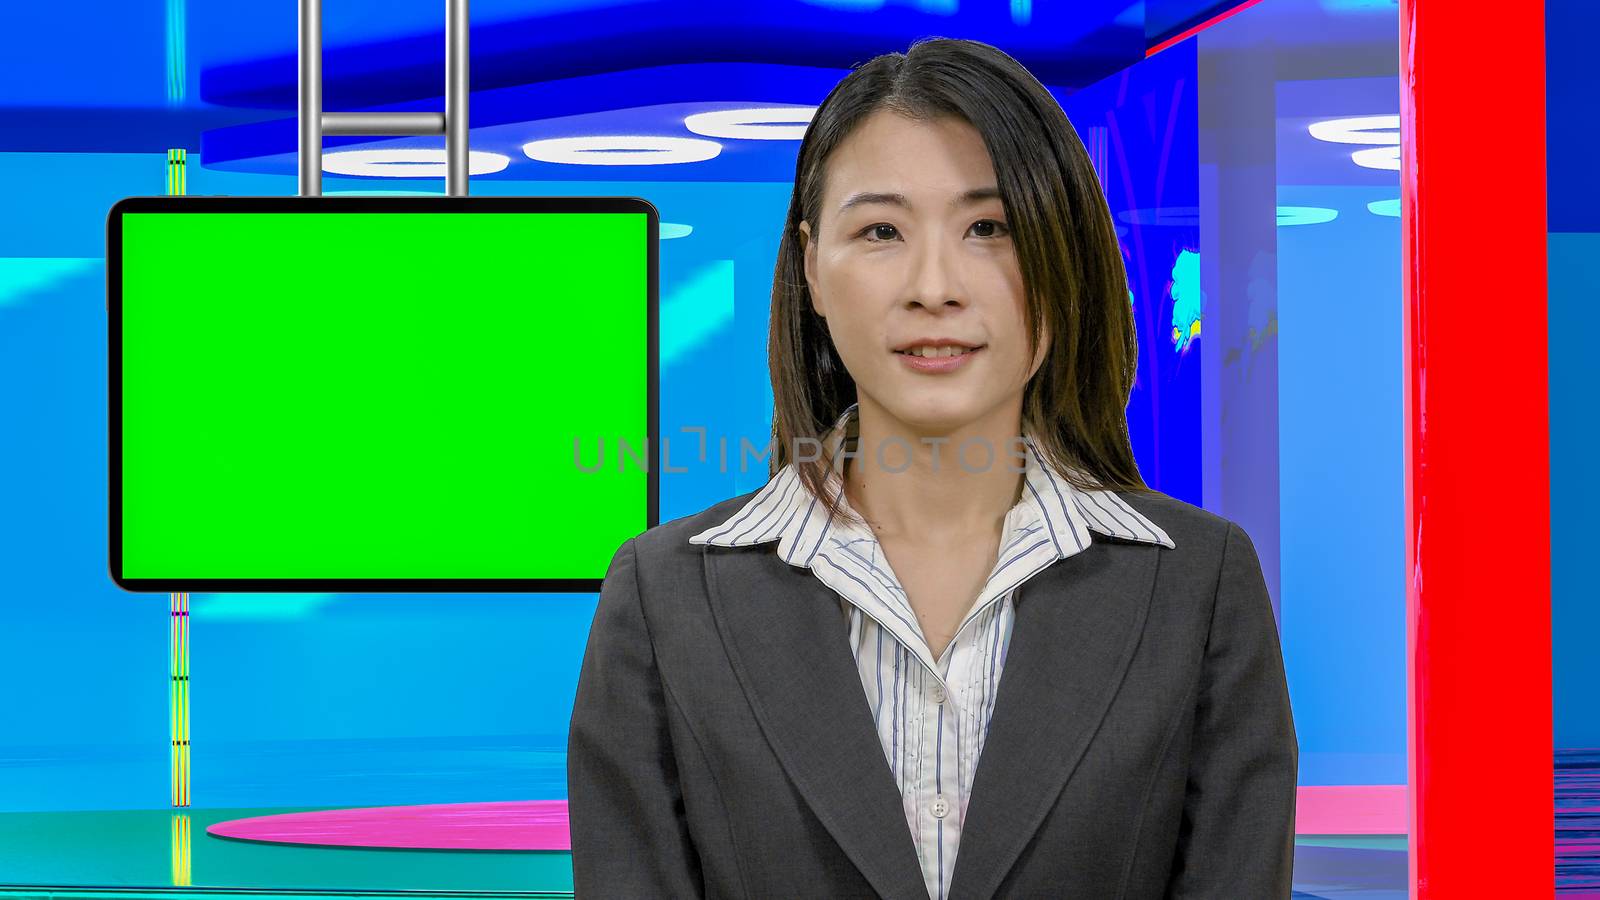 Female Asian American News anchorwoman in virtual TV studio with green screen suspended display, original design elements